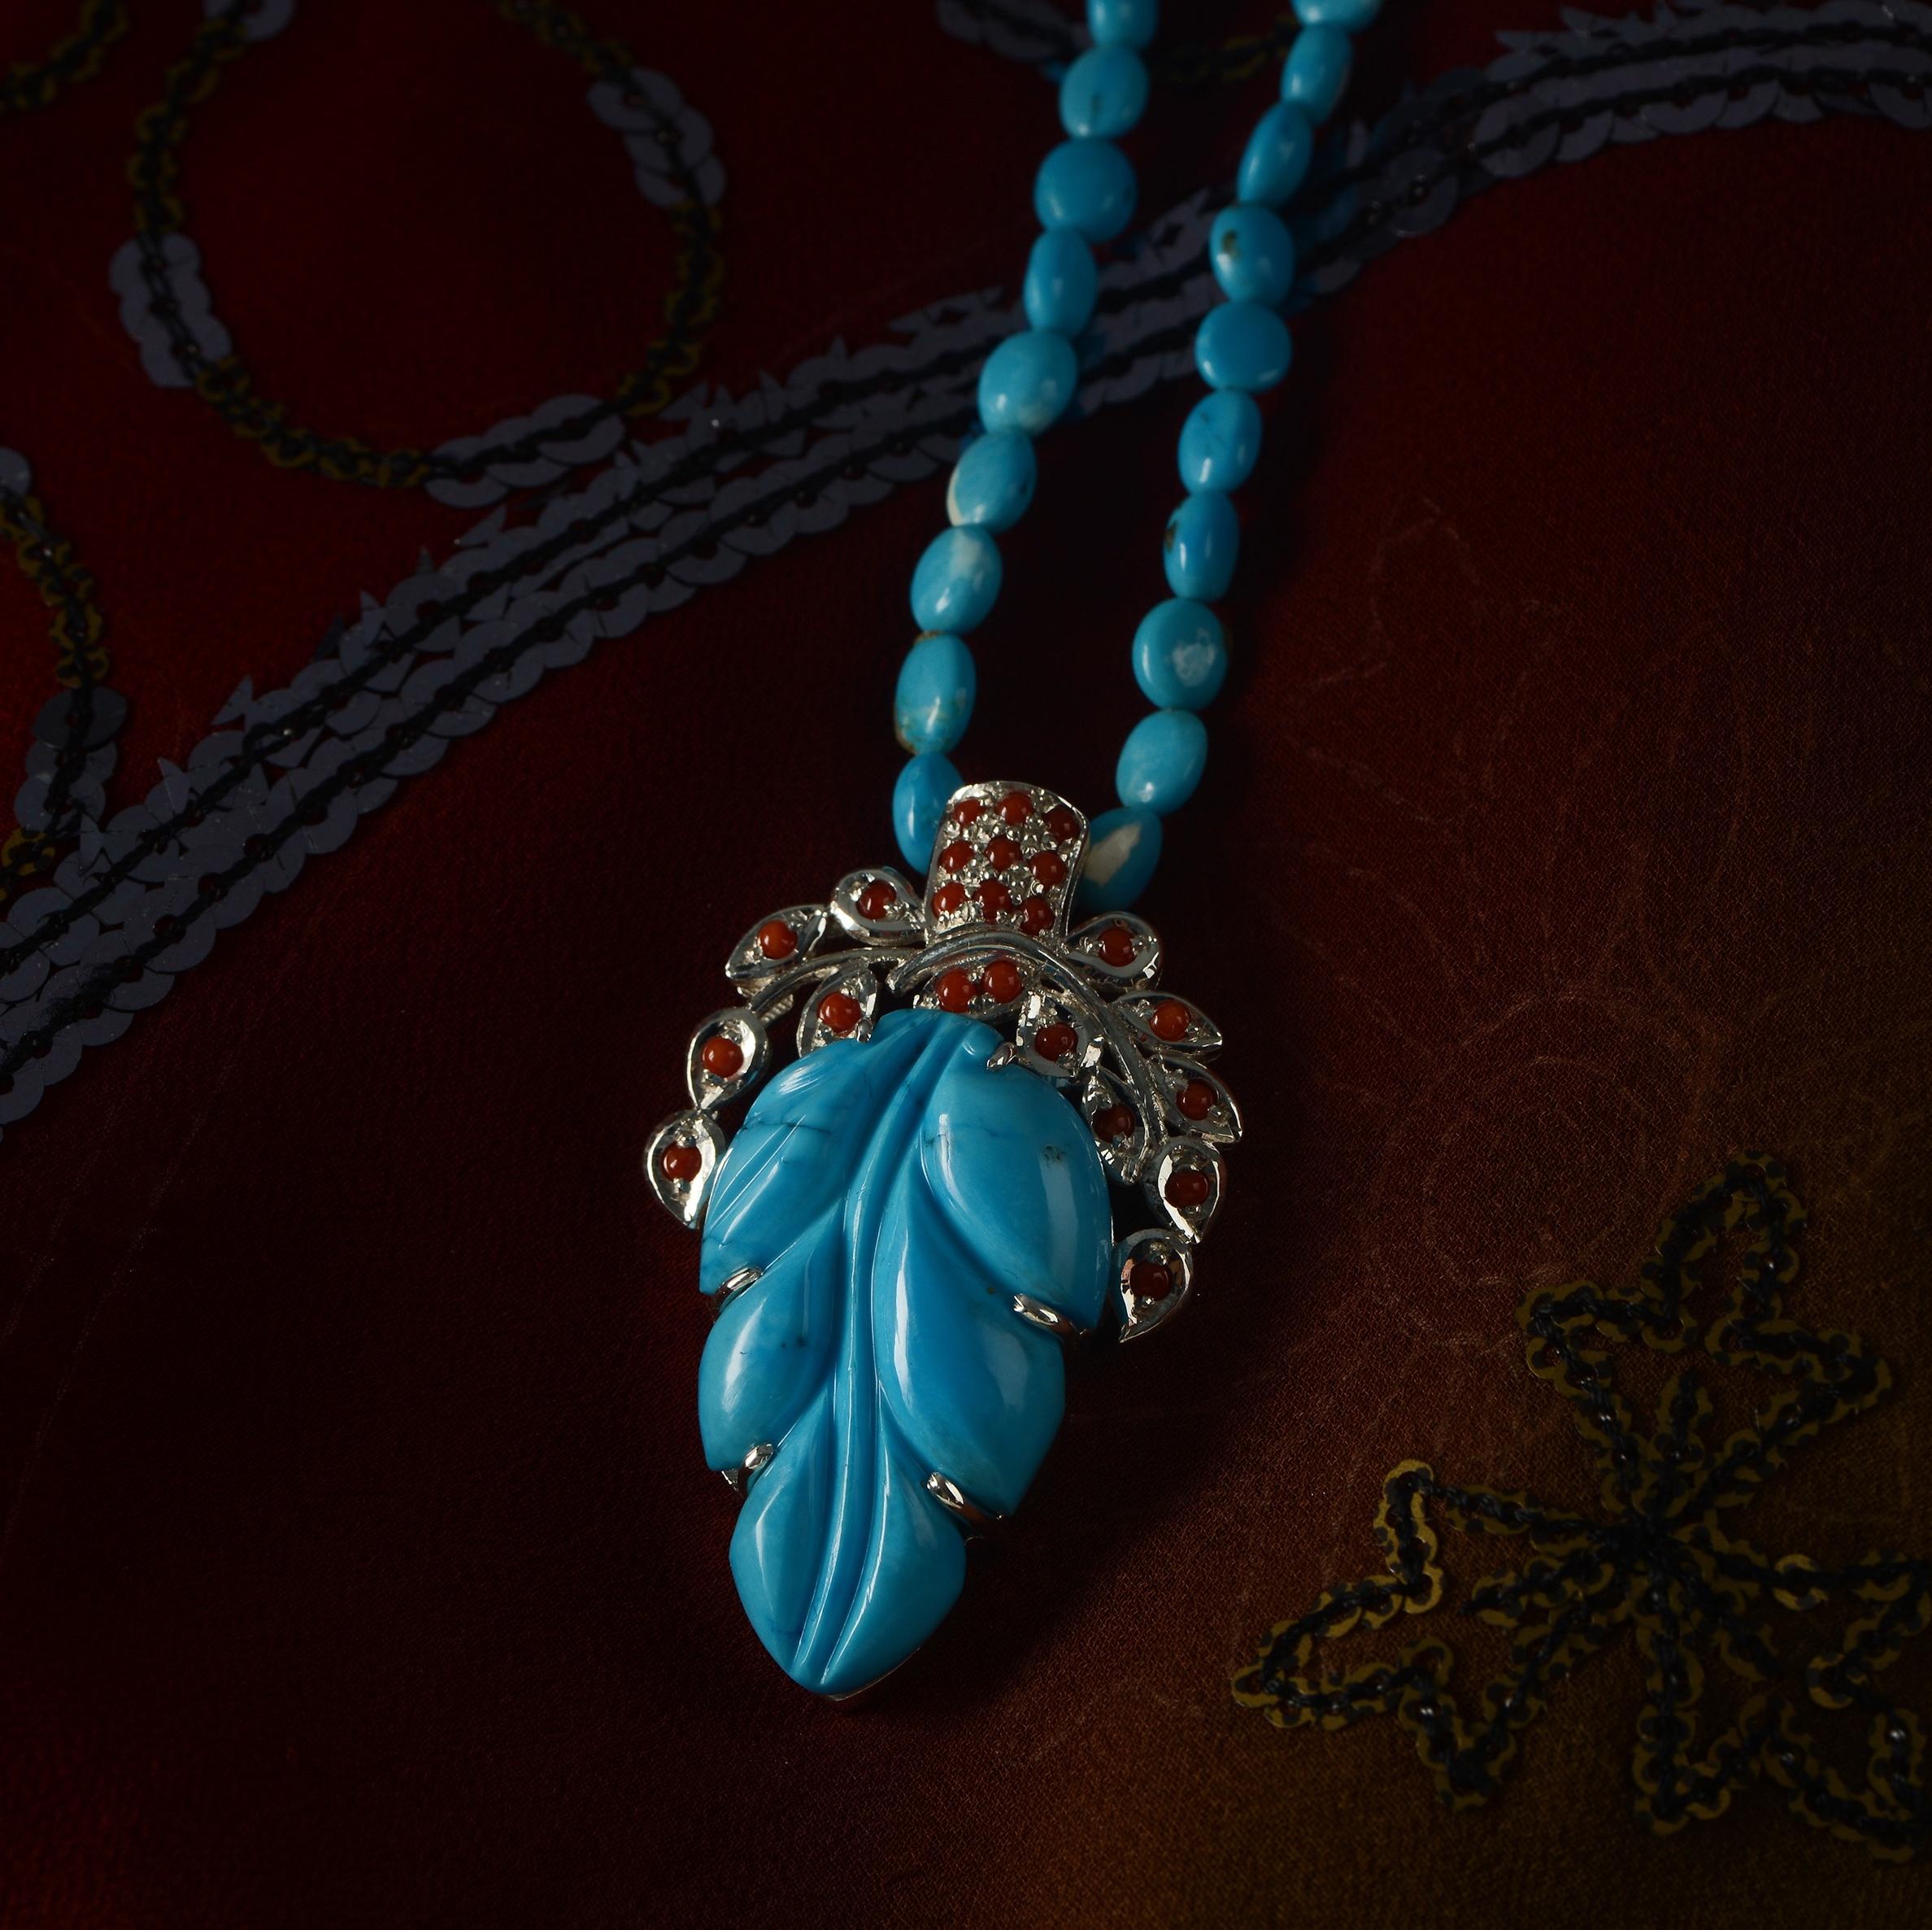 Using the ancient art of stone-carving, this stunning one-of-a-kind turquoise pendant has been hand-carved into the shape of a leaf and then hand-engraved. The top of the pendant which is made in sterling silver, has been embedded with red corals.